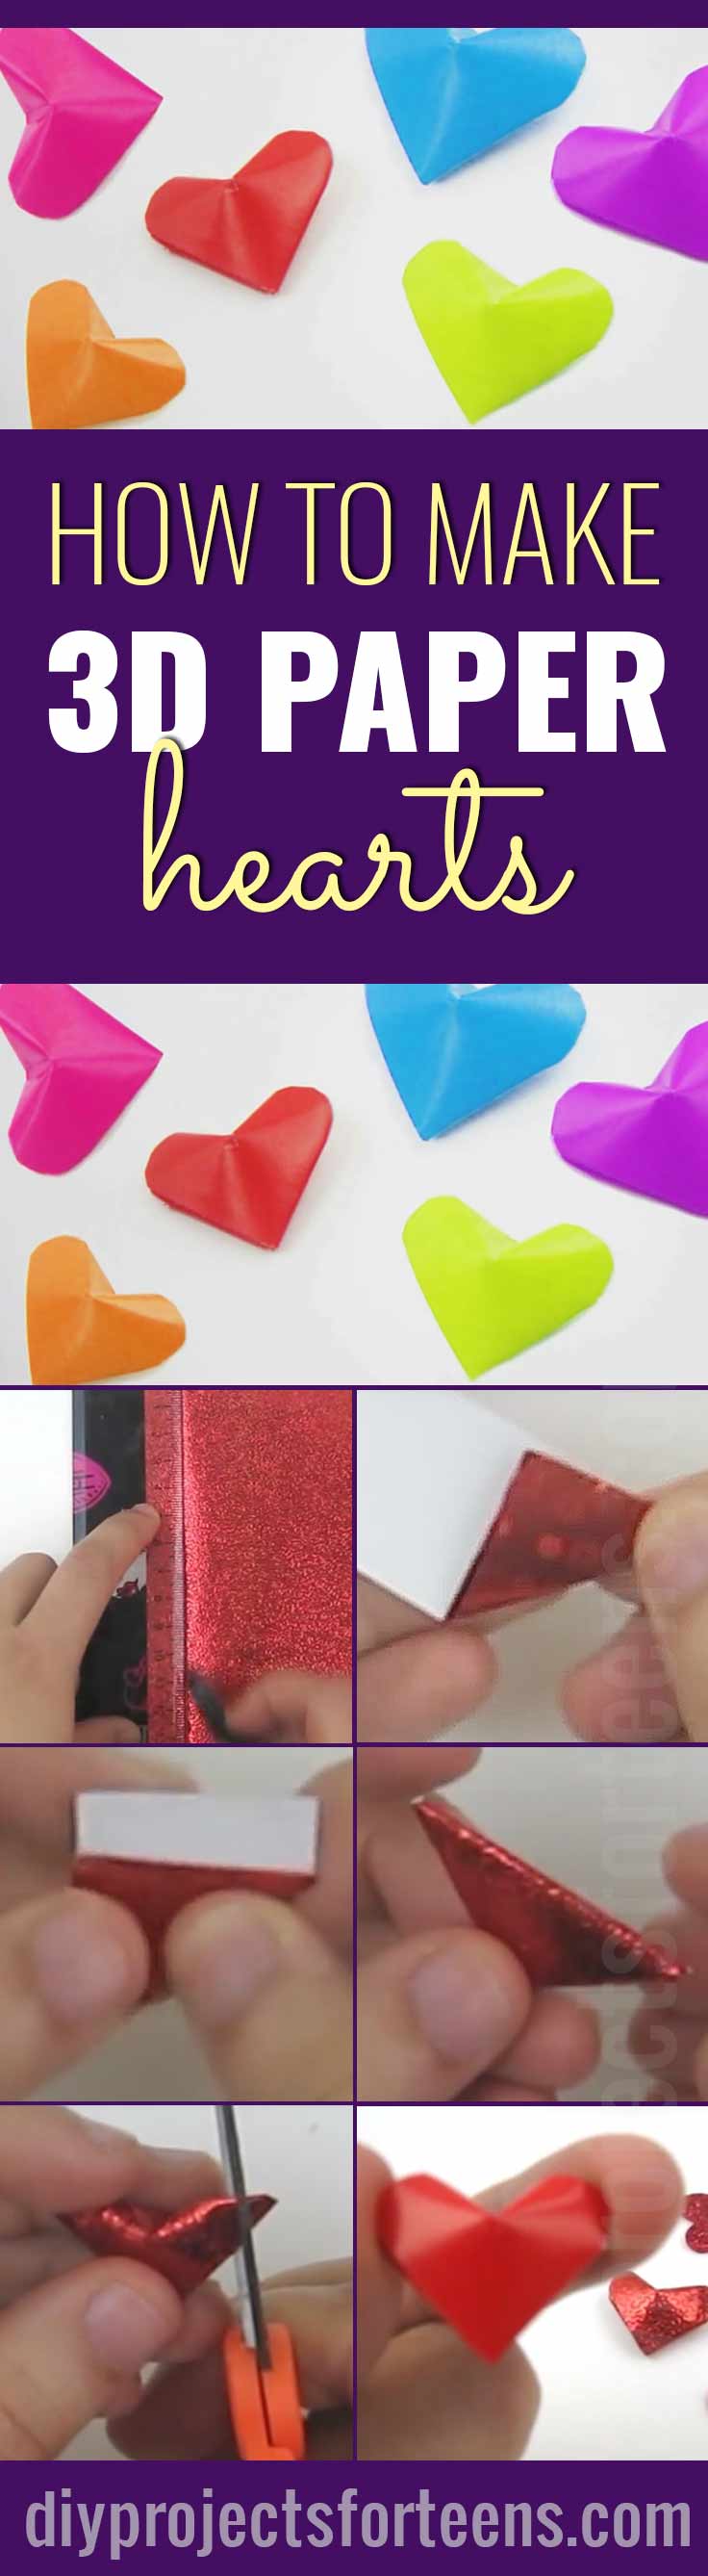 Cool Arts and Crafts Ideas for Teens, Kids and Even Adults | Cheap, Fun and Easy DIY Projects, Awesome Craft Tutorials for Teenagers | School, Home, Room Decor and Awesome Gift Ideas | 3d paper hearts| http://stage.diyprojectsforteens.com/arts-and-crafts-ideas-for-teens